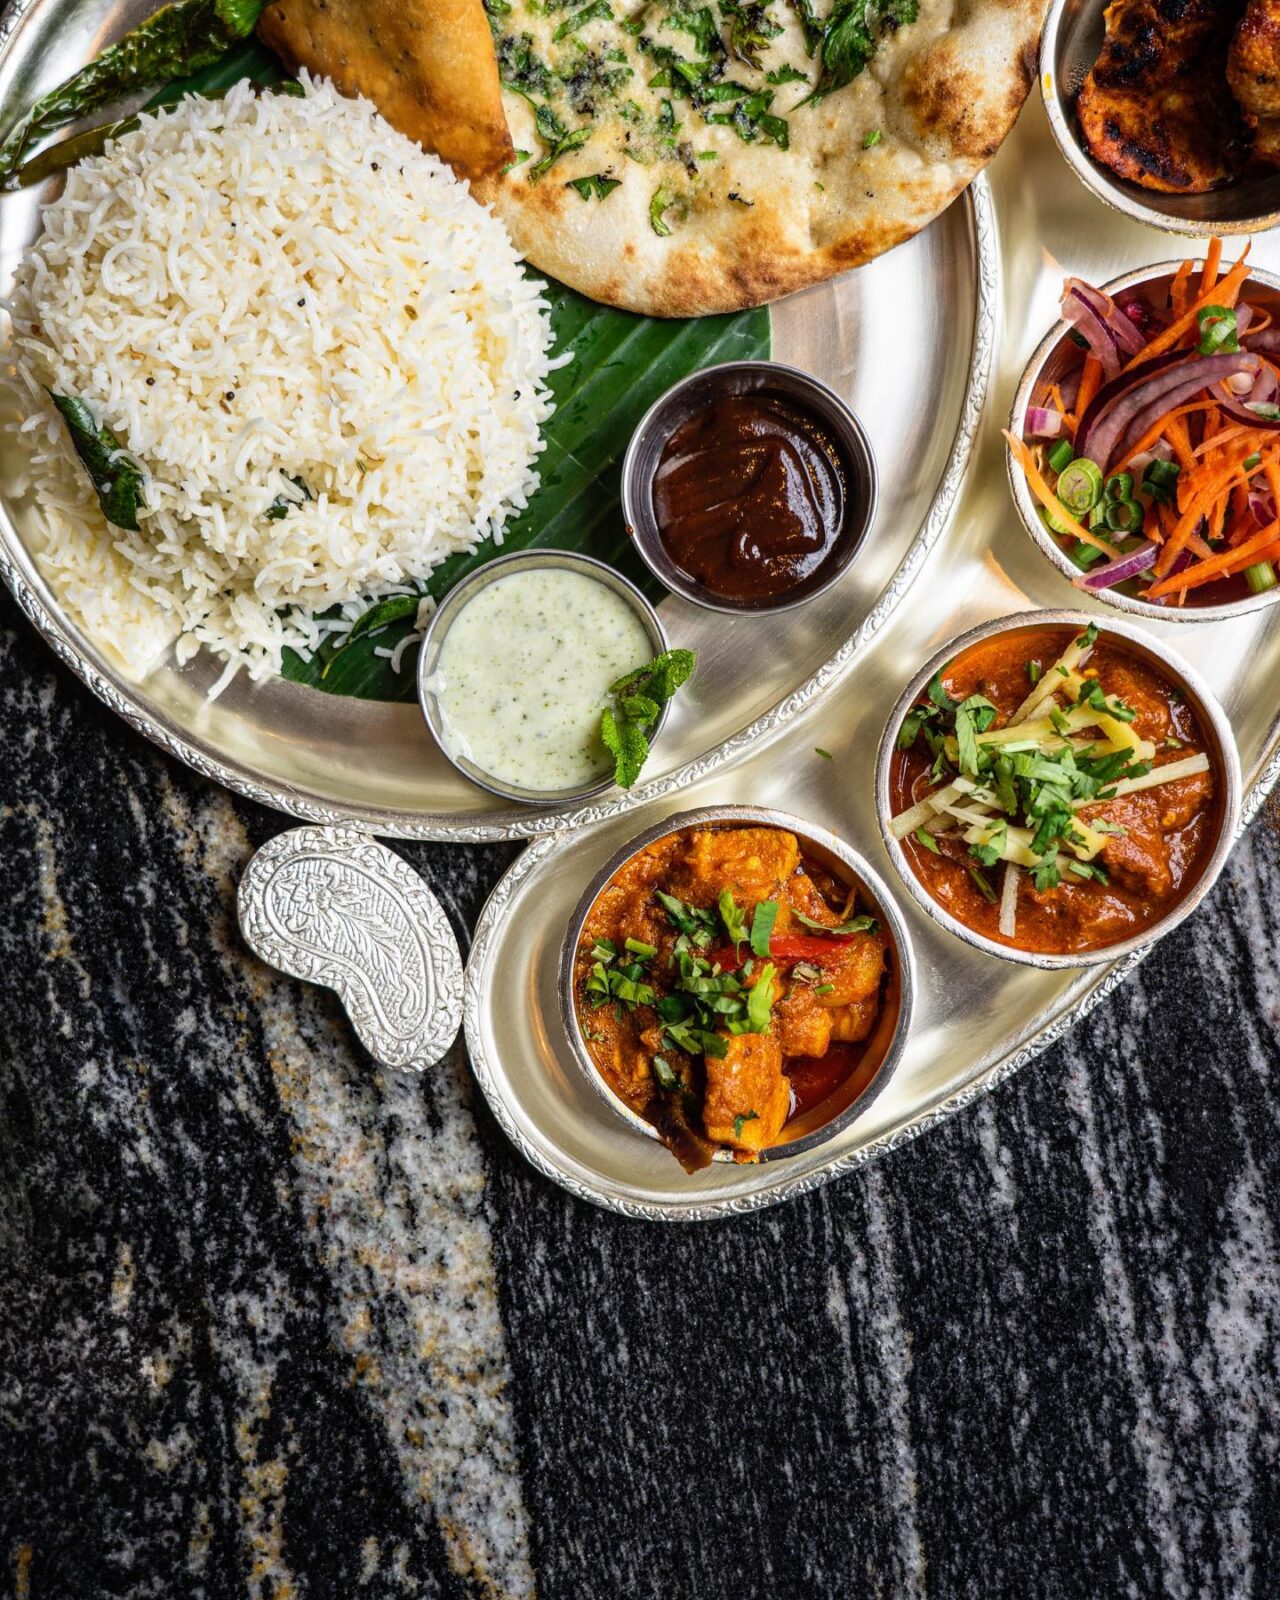 Learn to cook British favourites at this award-winning Manchester curry house, The Manc